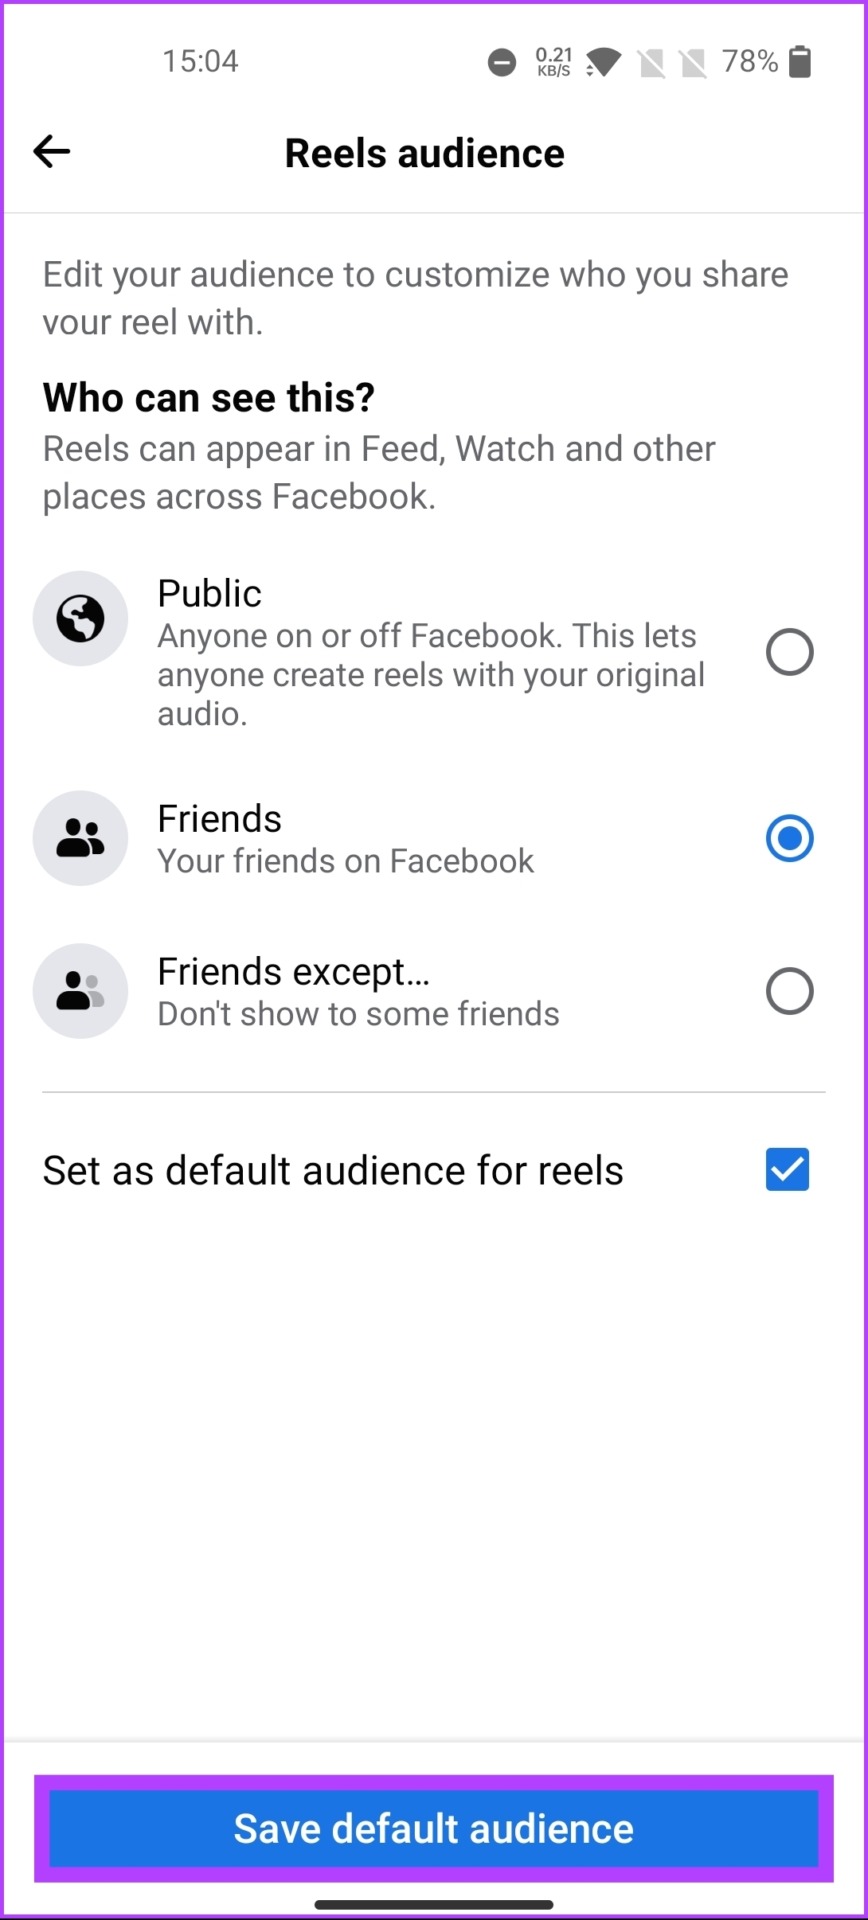 Tap the 'Save default audience' button